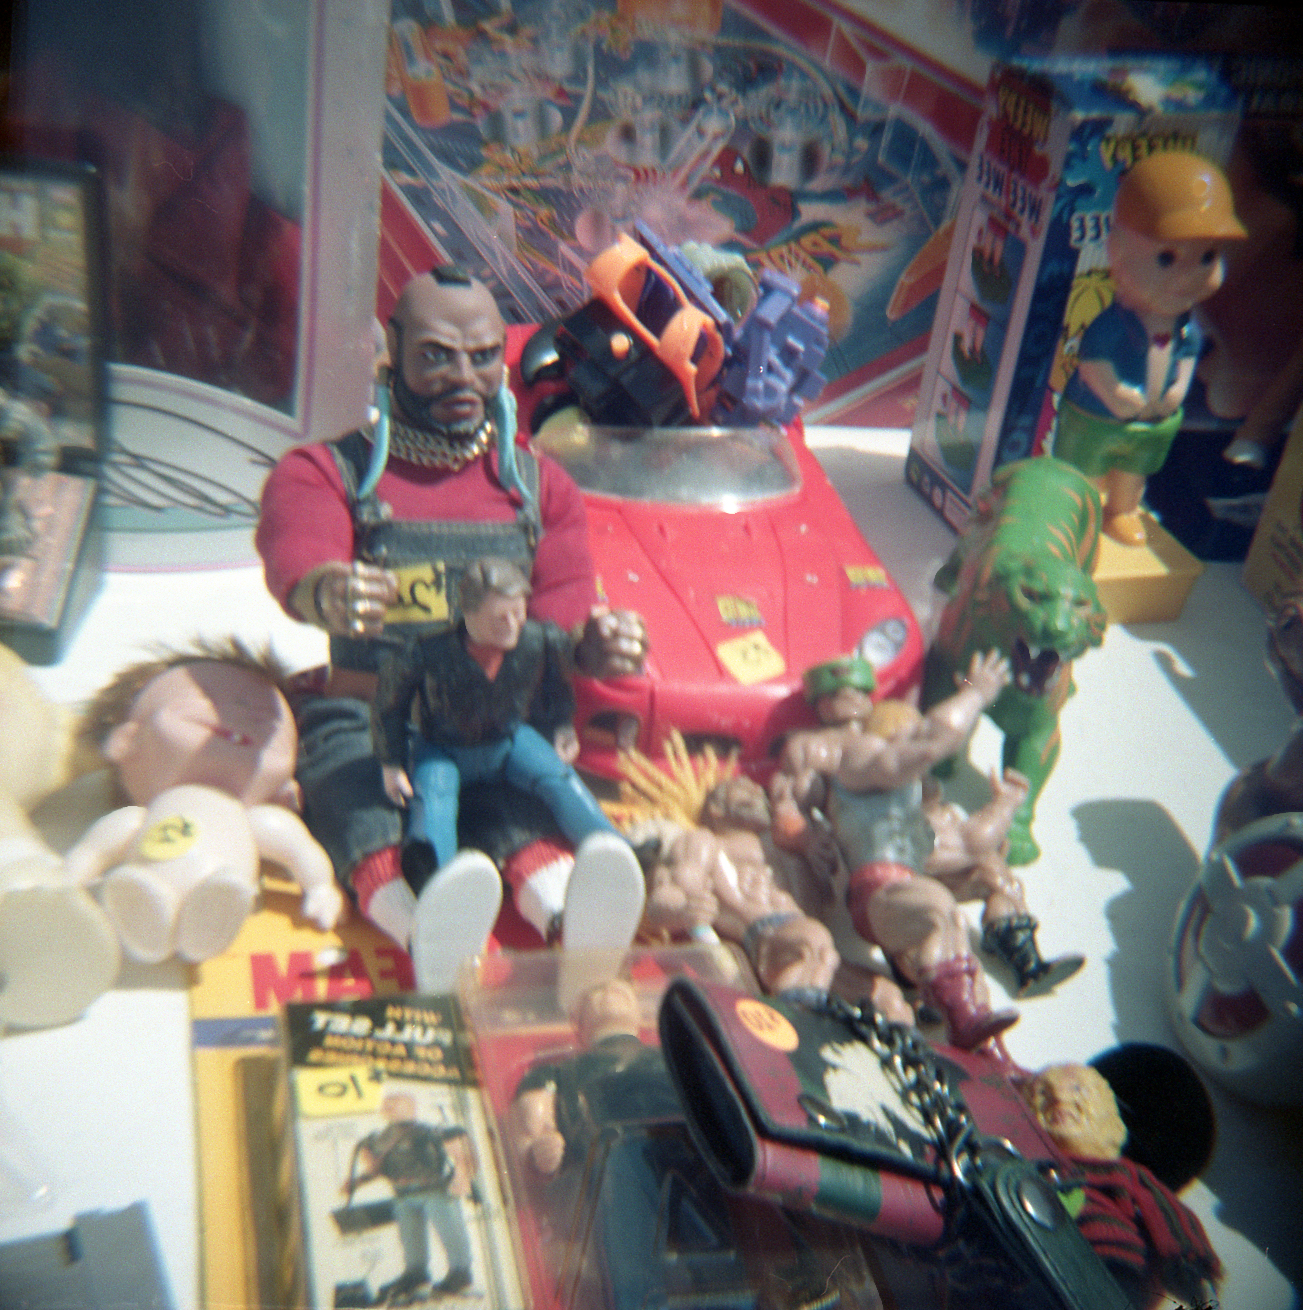 an image of a display of action figures